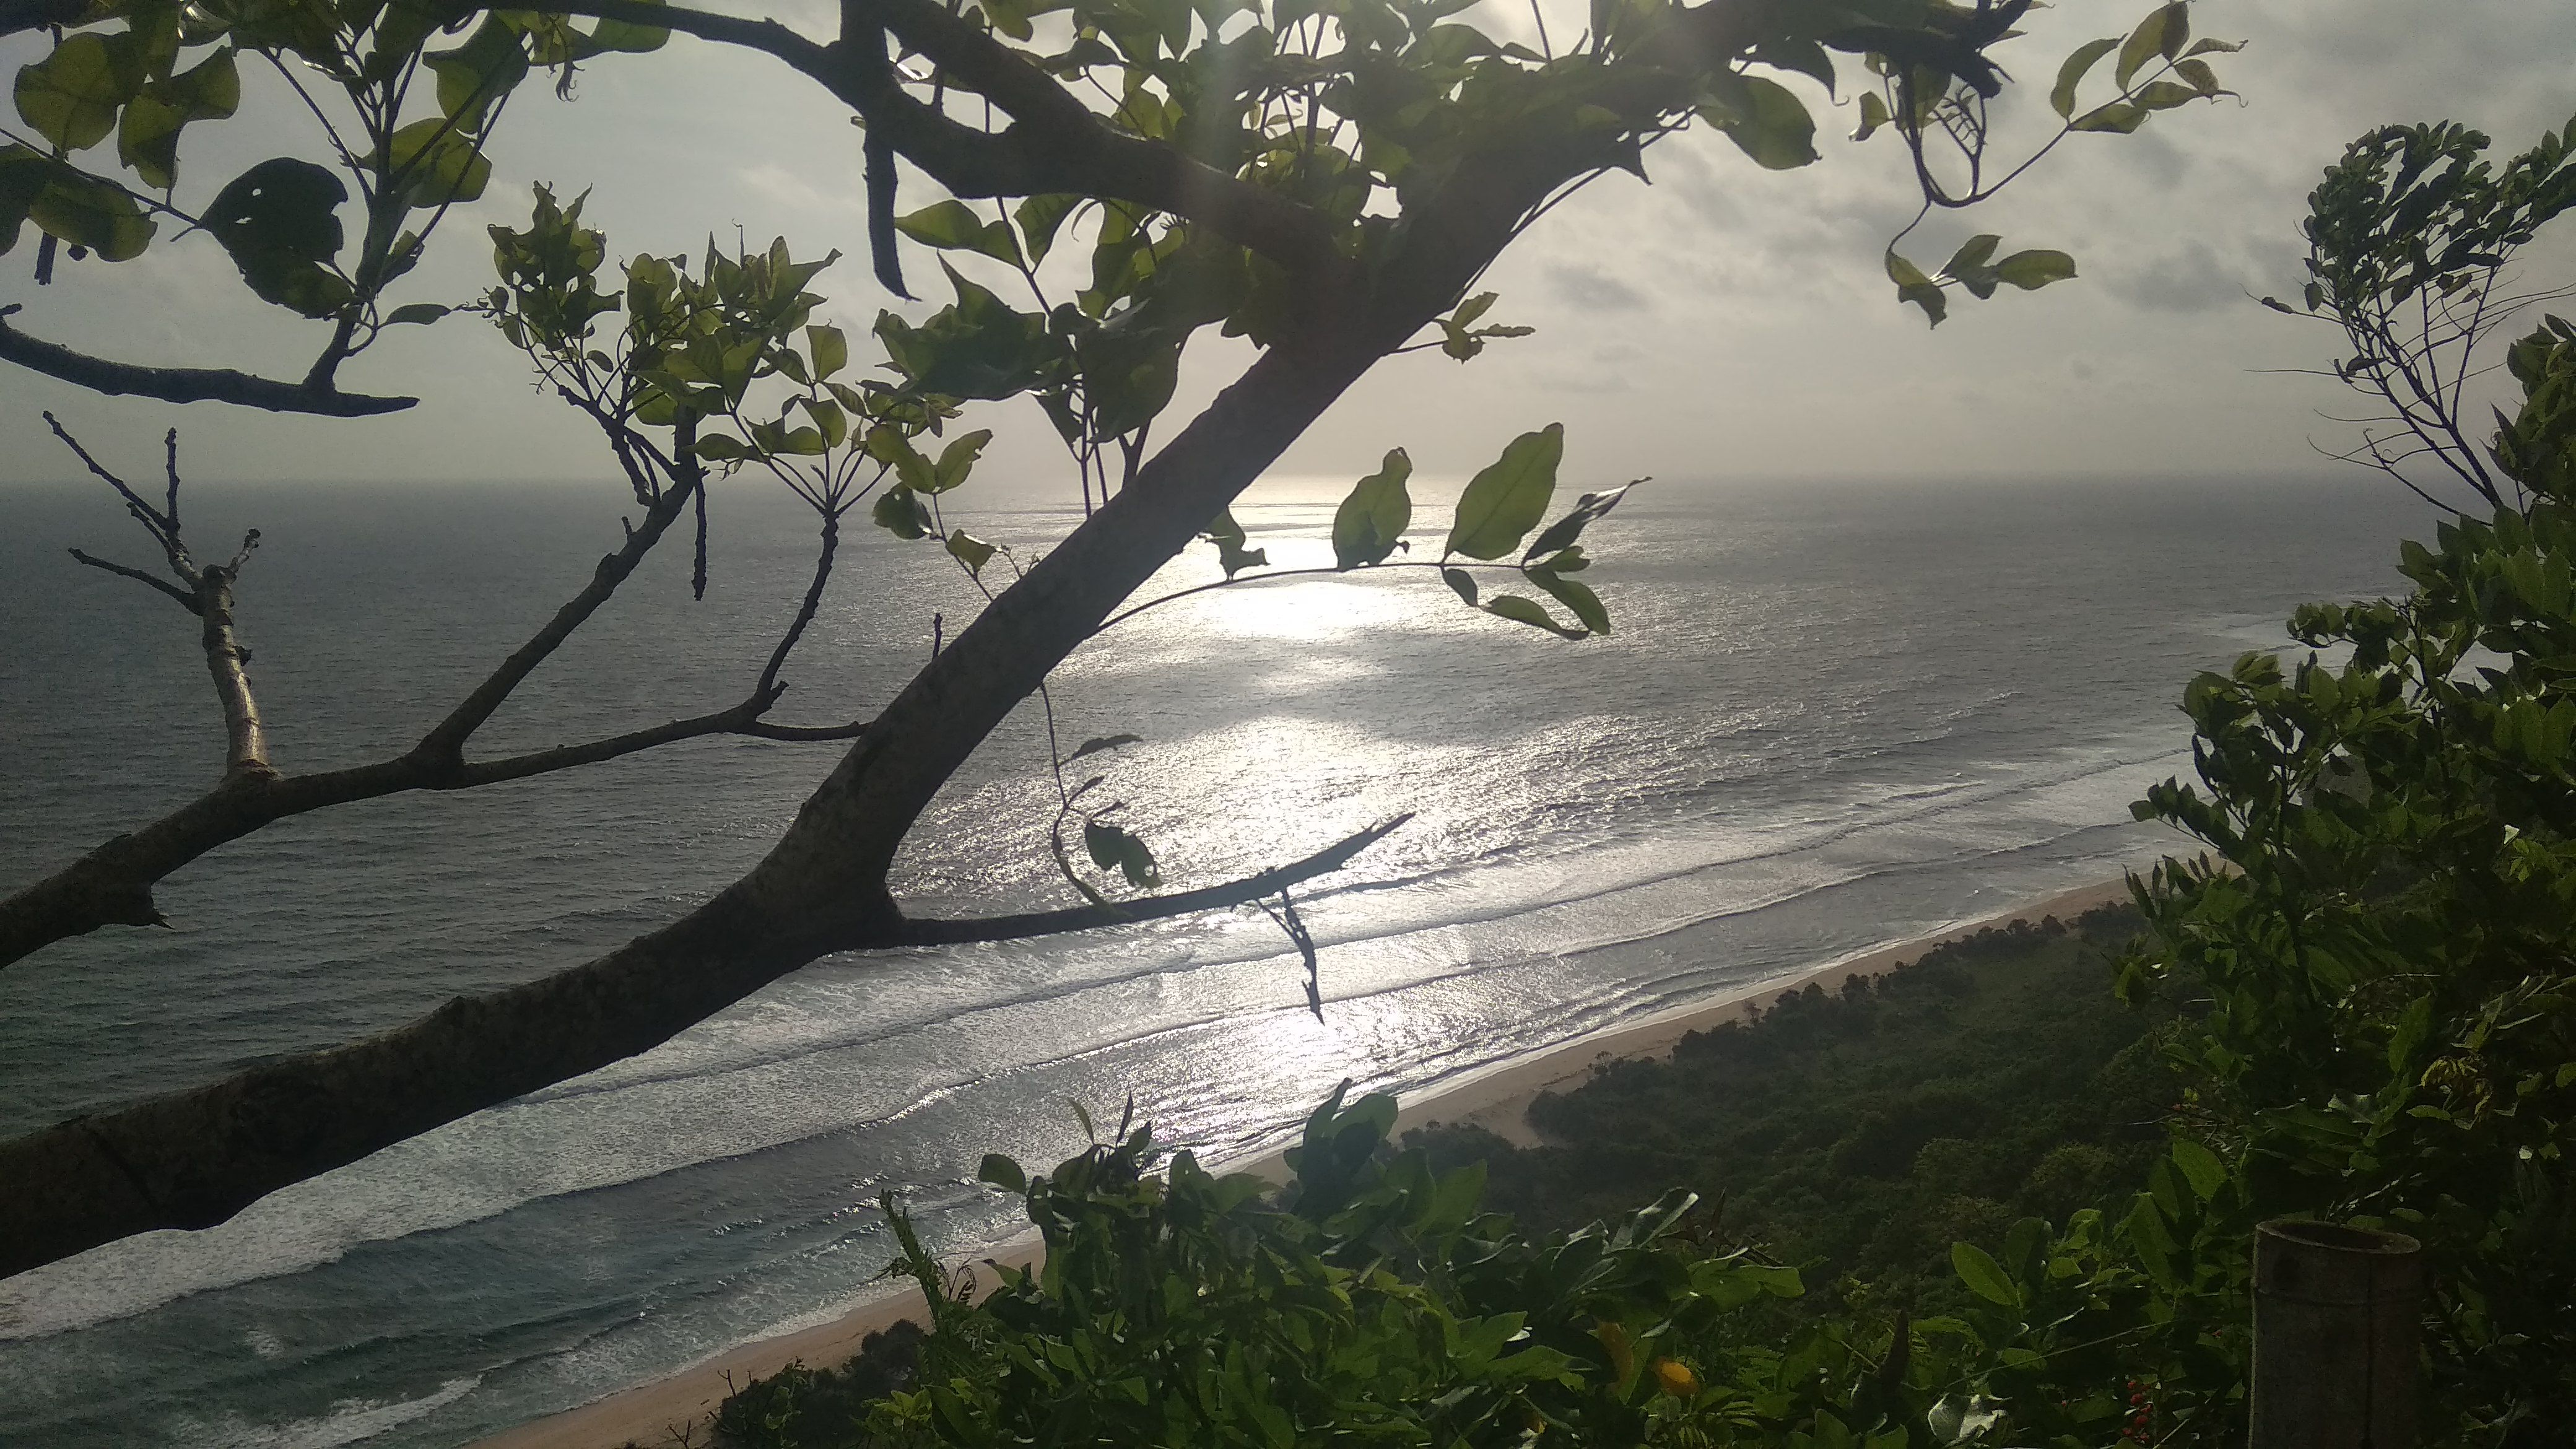 Caption: A photo of the Nyang-Nyang Beach and greenery taken from the top of the hill. (Local Guide dian_9395)